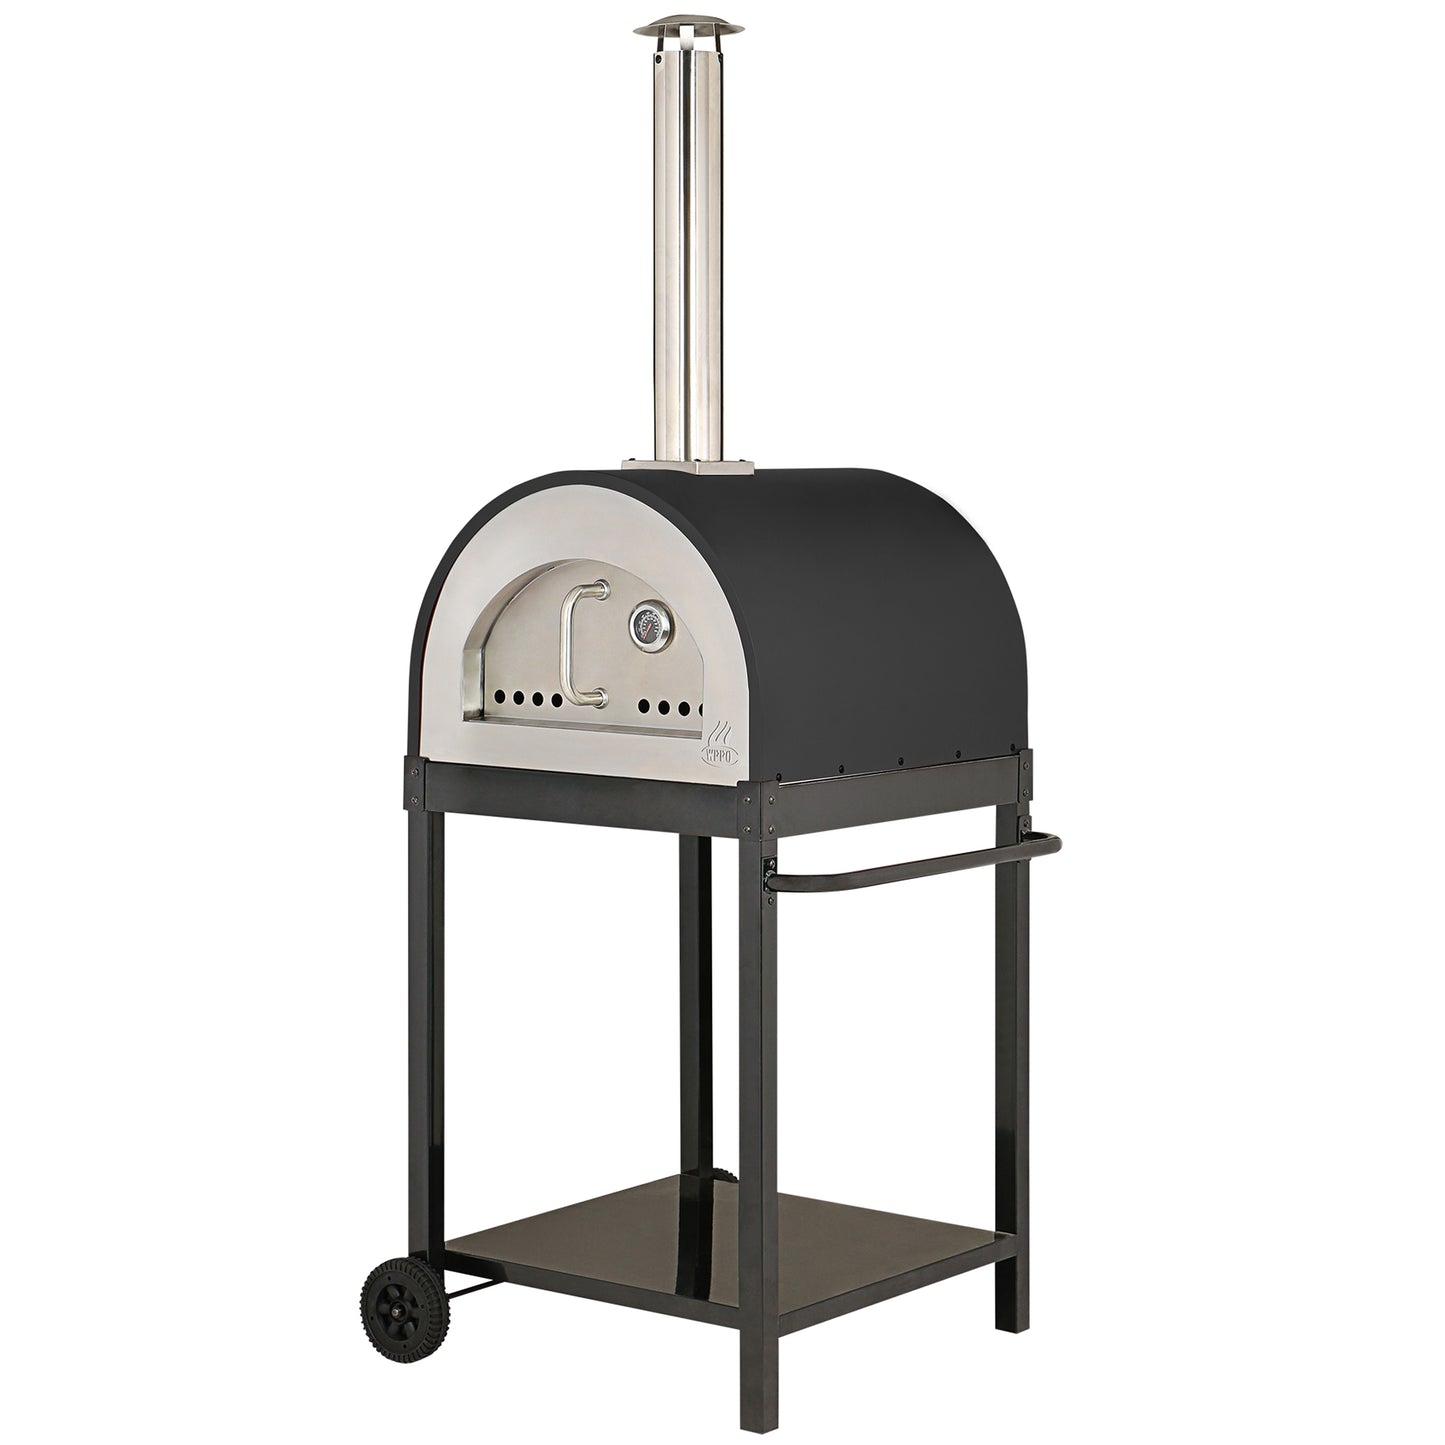 SUPER SALE! 39% OFF! Gas-Ready Traditional 25" Pizza Oven